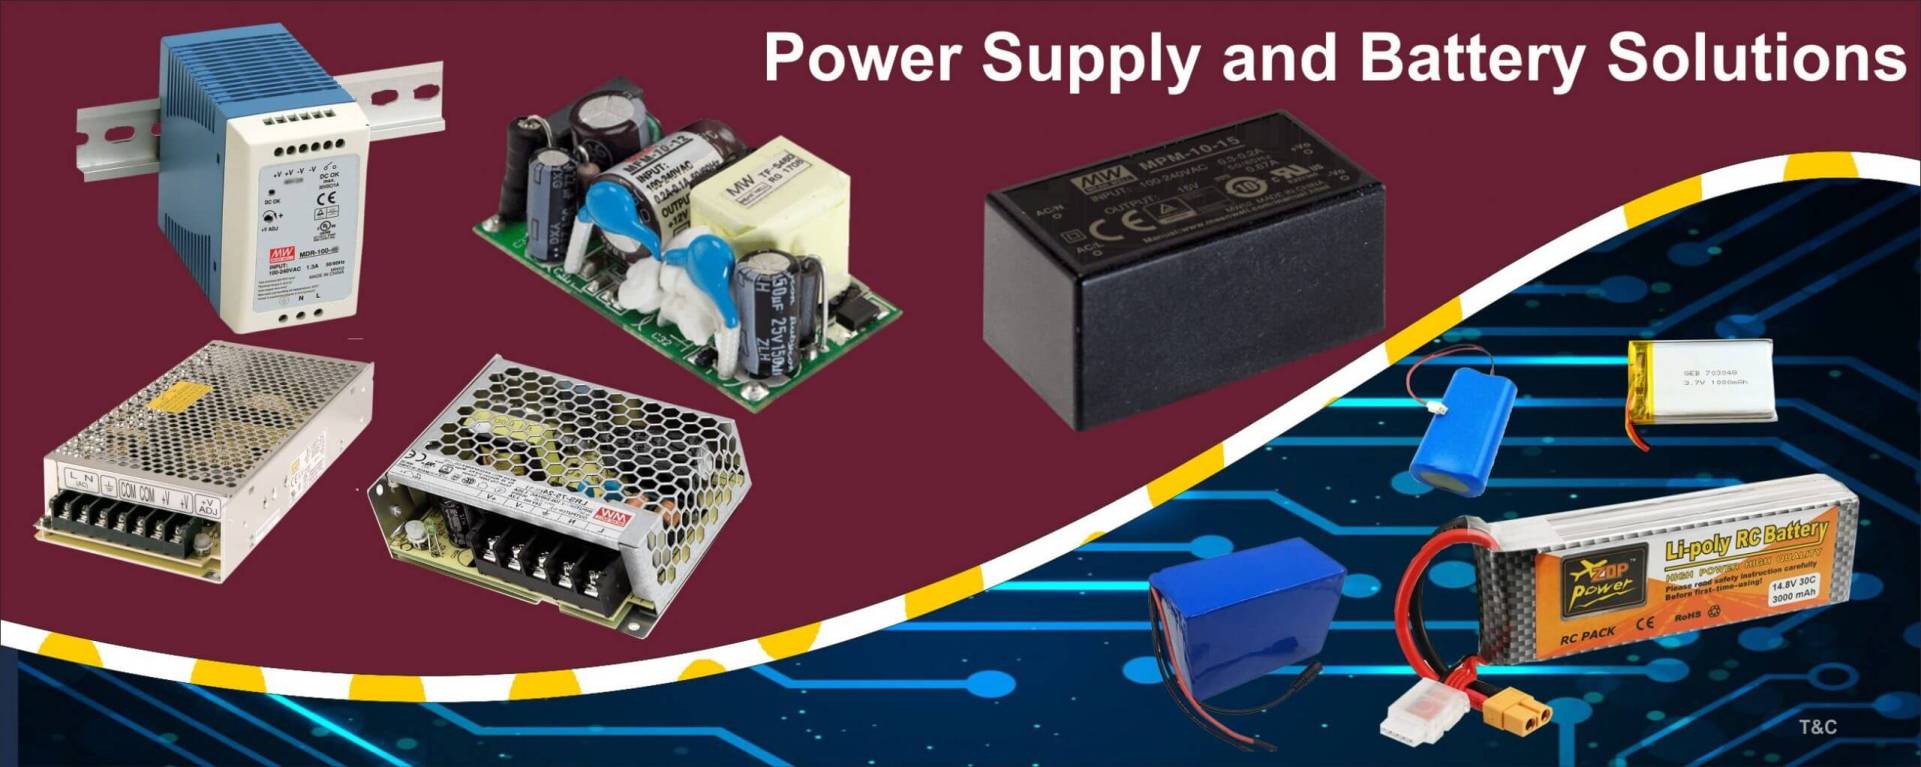 Sharvielectronics: Best Online Electronic Products Bangalore | Power Supply Banner N1 | Electronic store in Karnataka